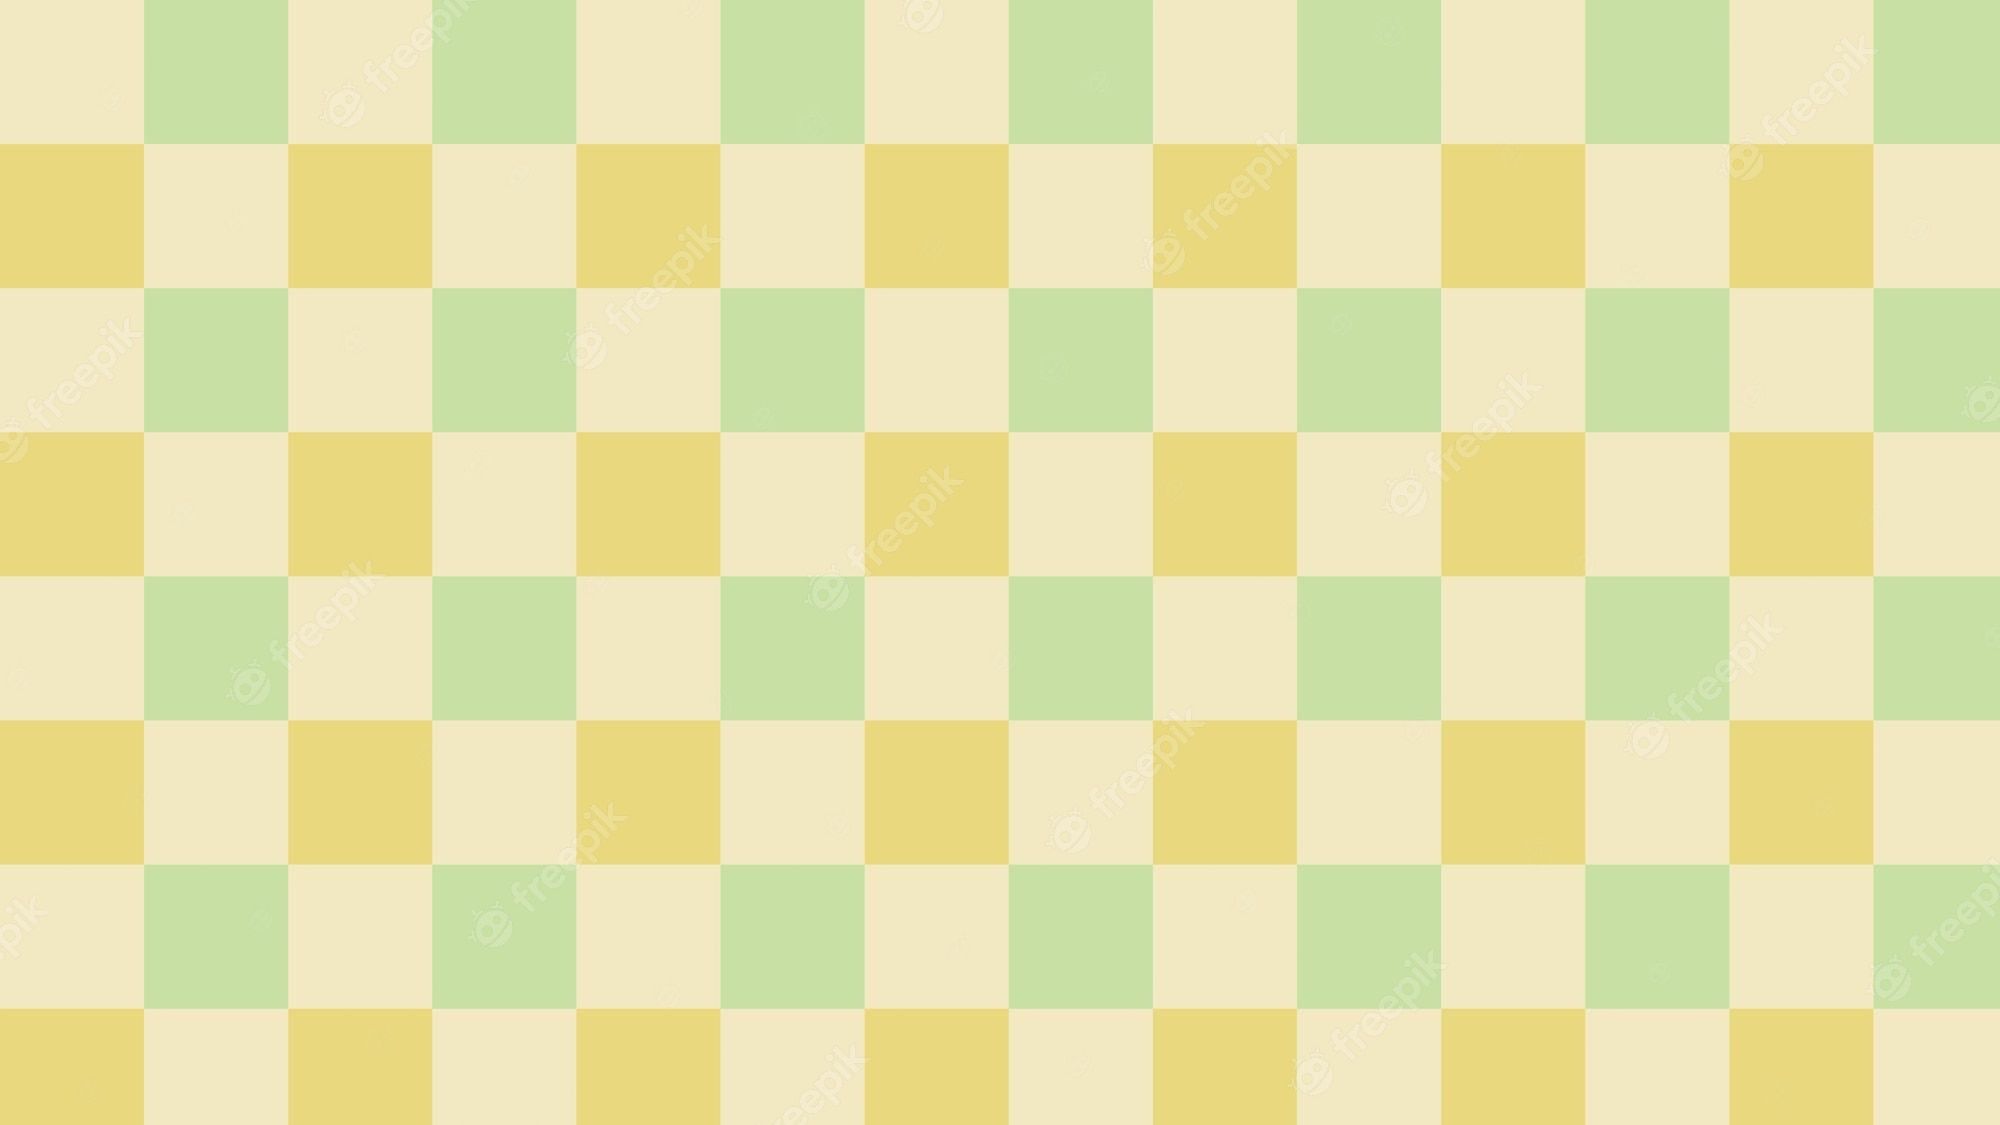 A pattern of green and yellow squares - Light yellow